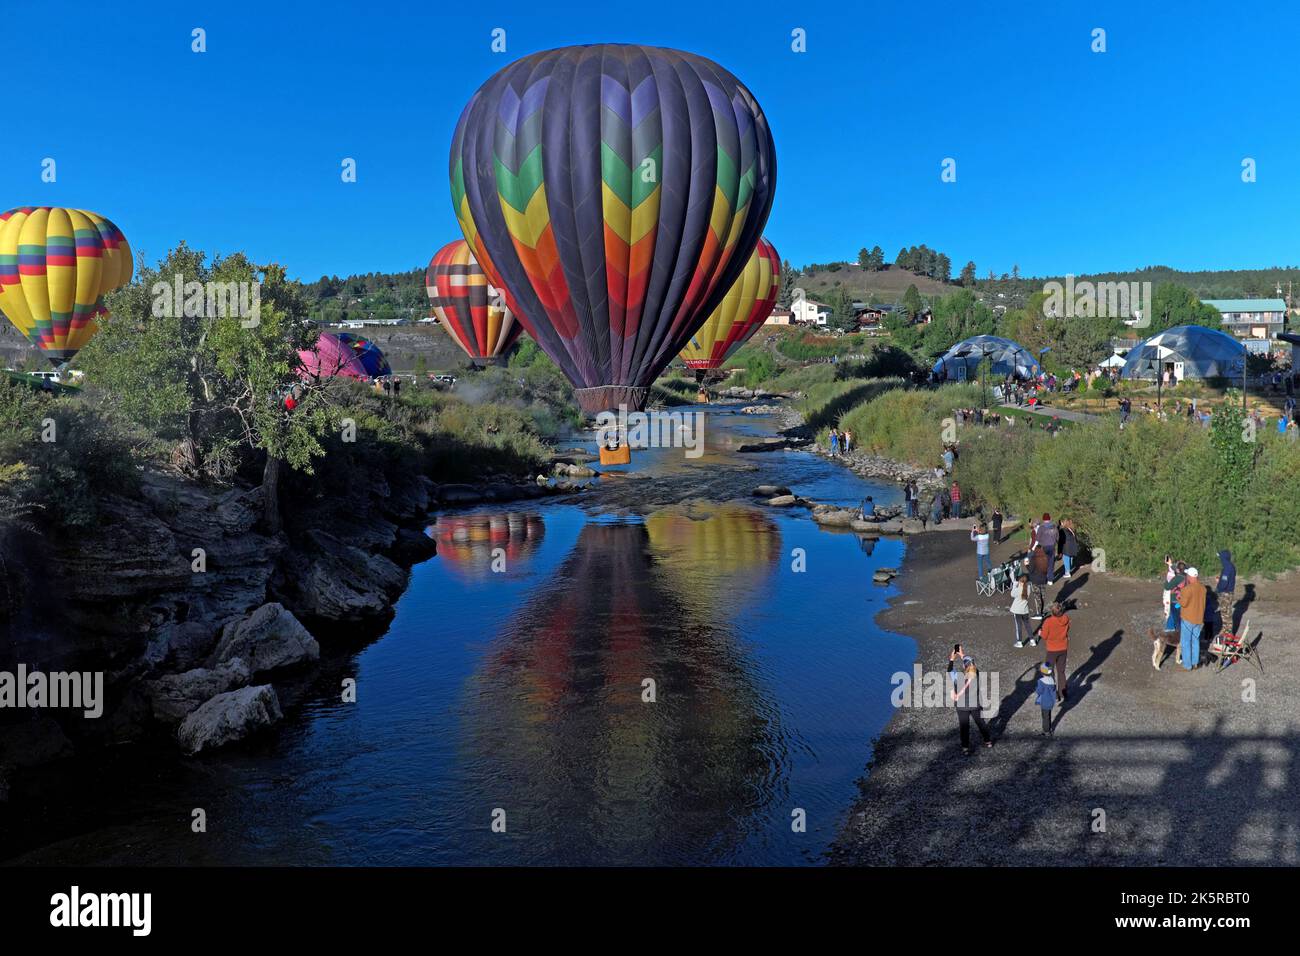 Colorful hot air balloons take to the skies over the San Juan River in Pagosa Springs, Colorado during the 2022 Colorfest Balloon Rally. Stock Photo